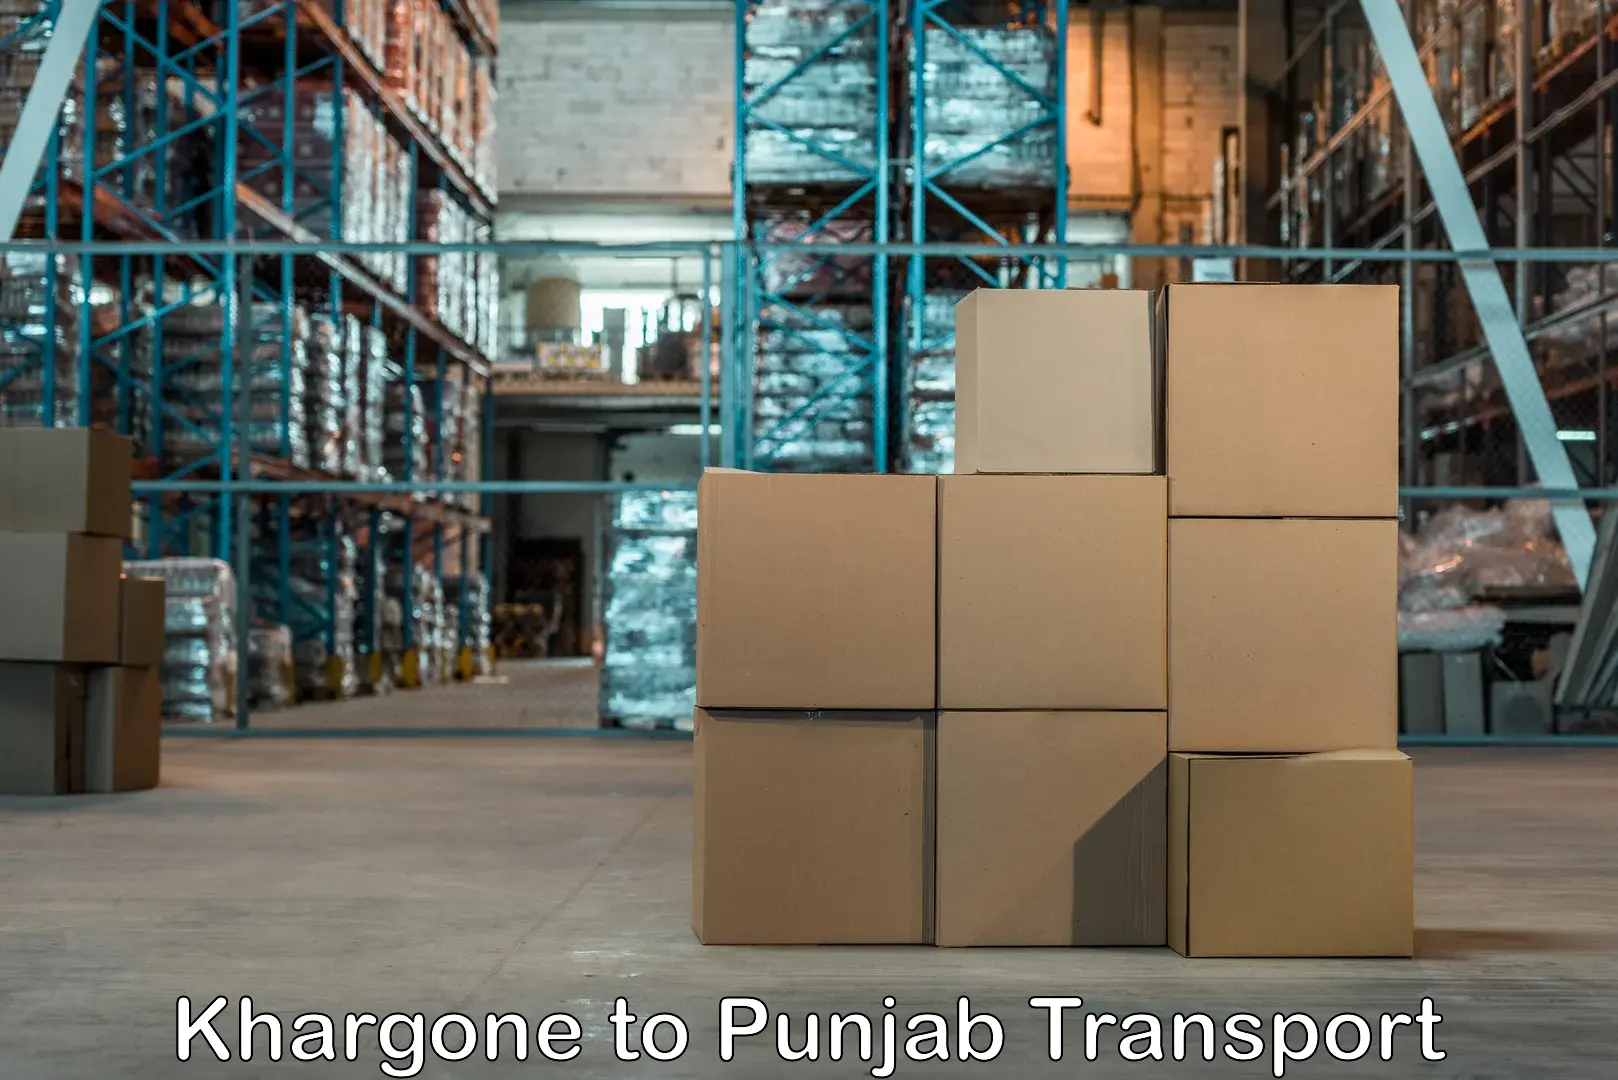 Truck transport companies in India Khargone to Sultanpur Lodhi